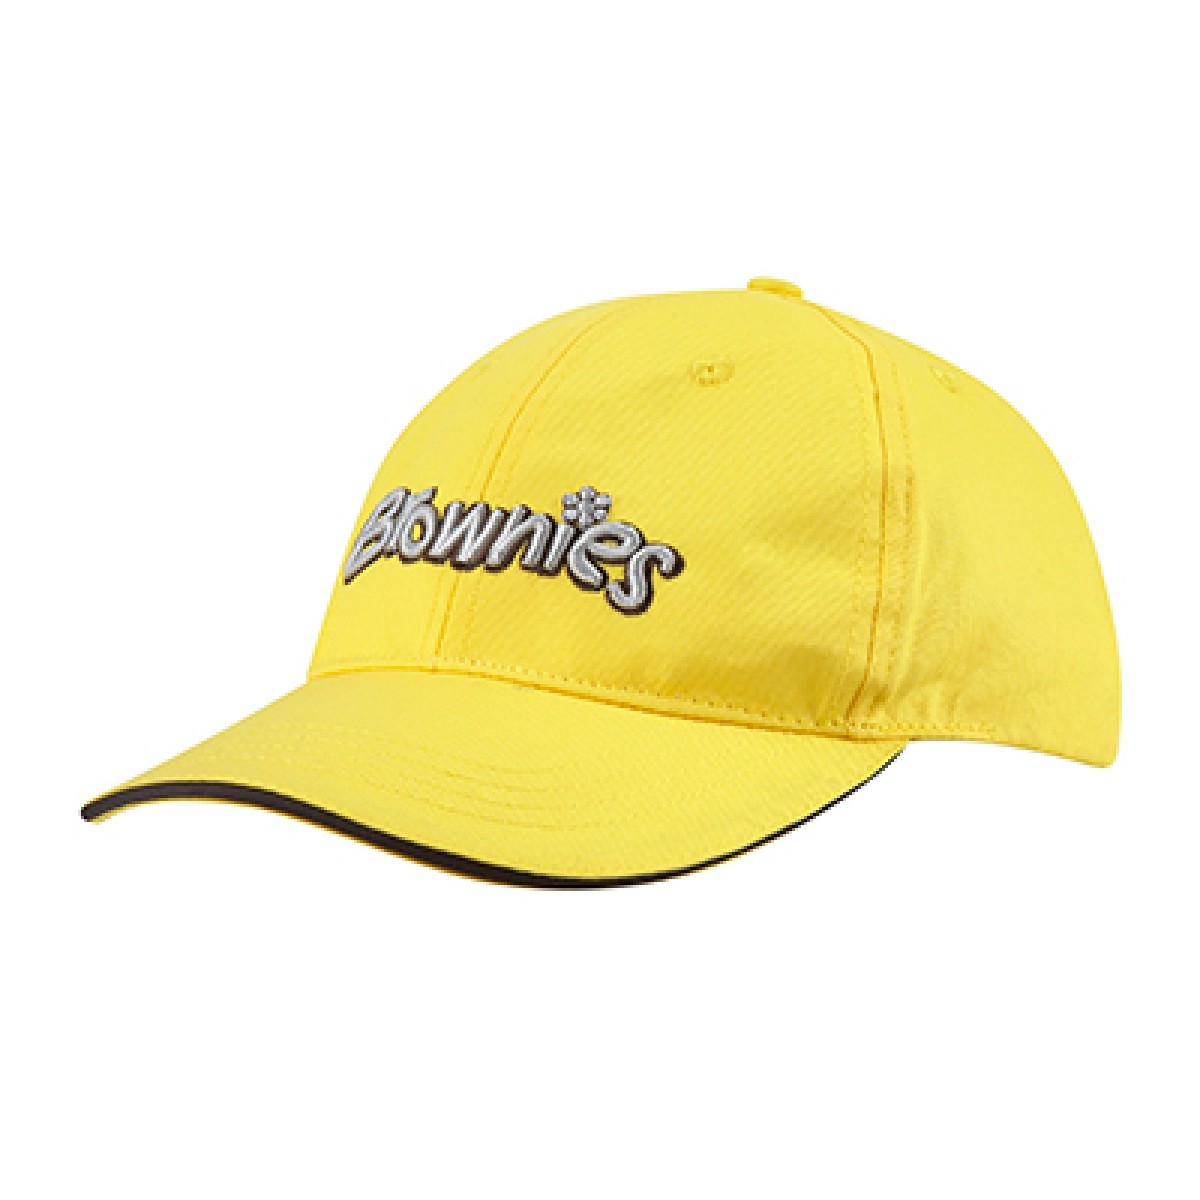 Brownies Baseball Cap | Forsters School Outfitters Ltd - Forsters ...